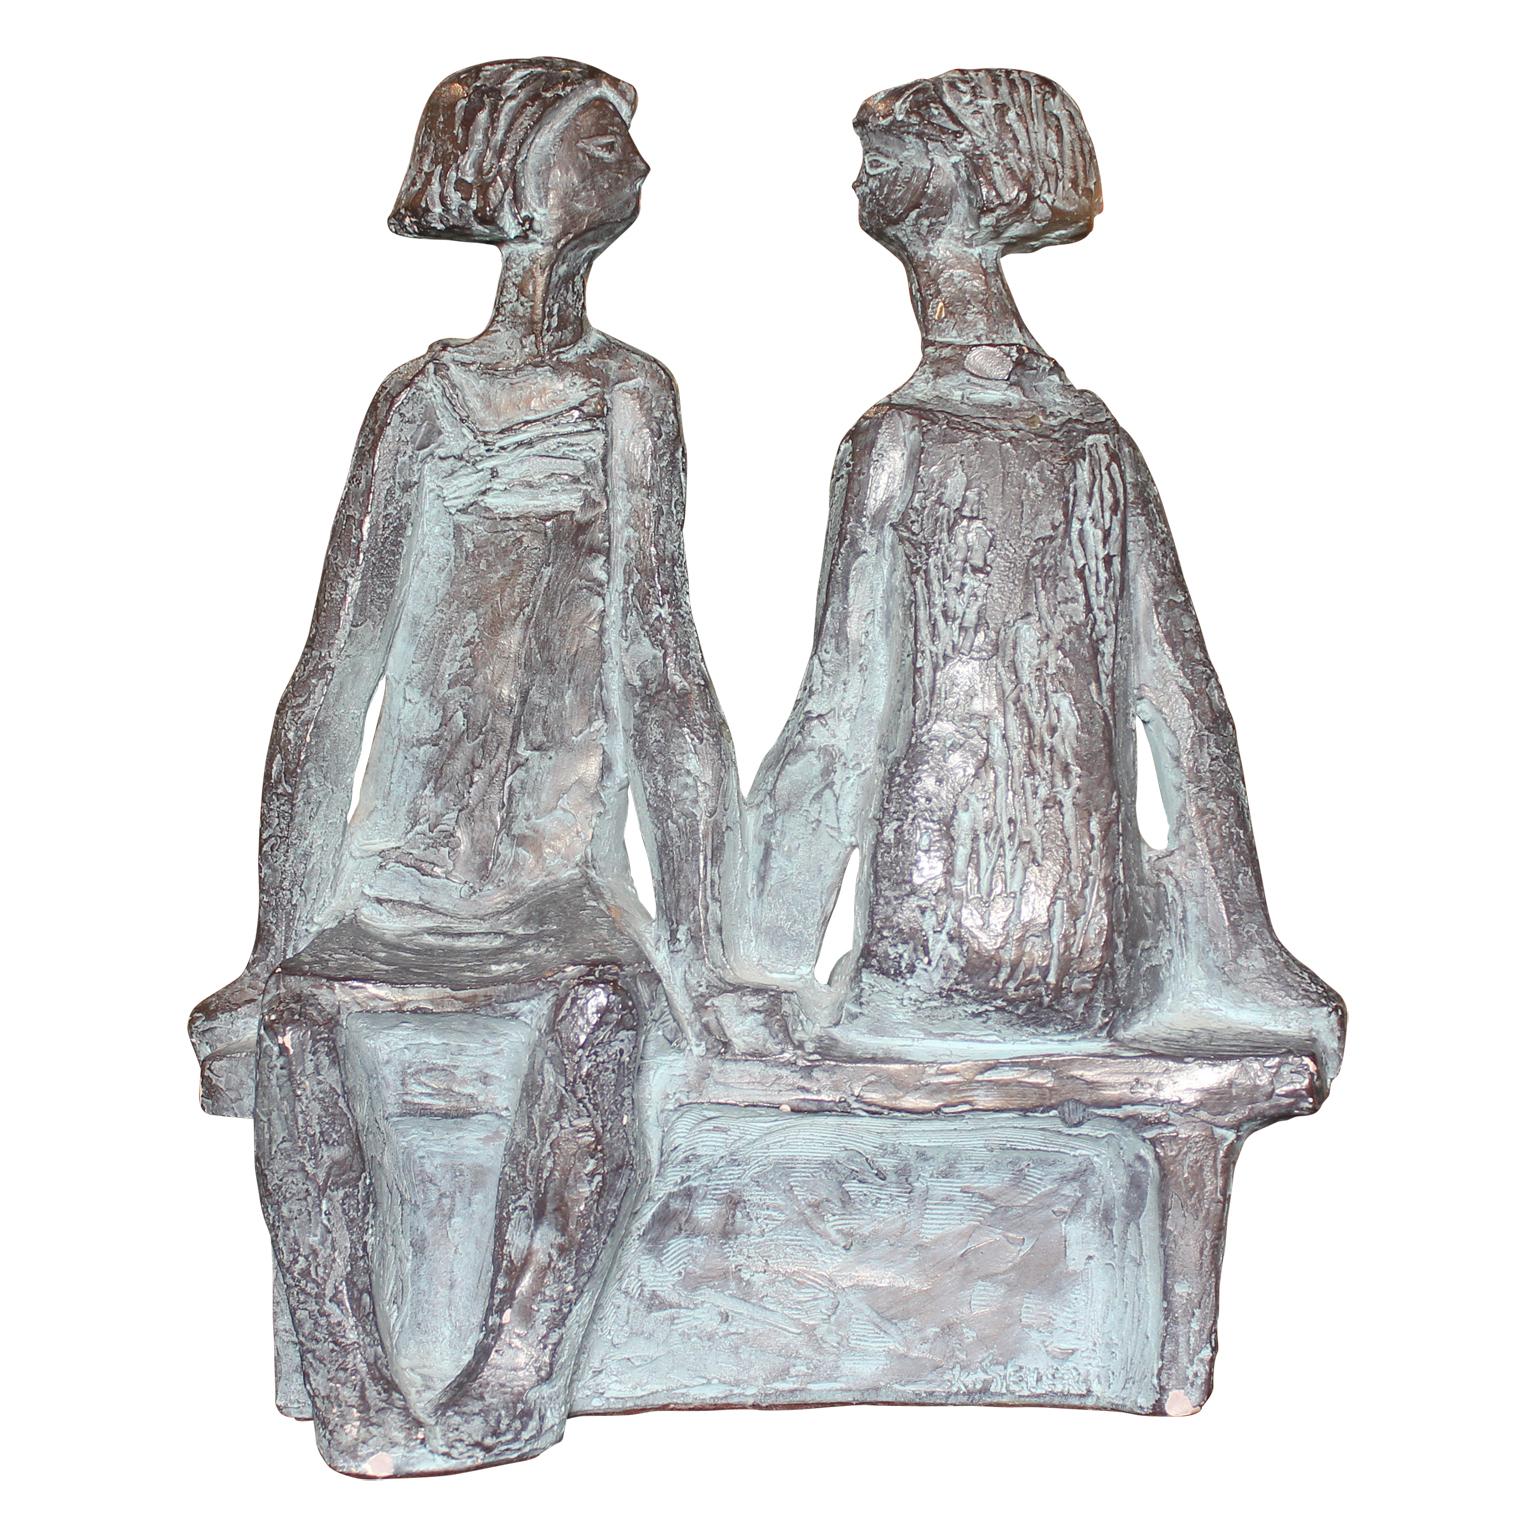 Austin Productions Abstract Sculpture - Seated Girls on a Bench Bronze Sculpture